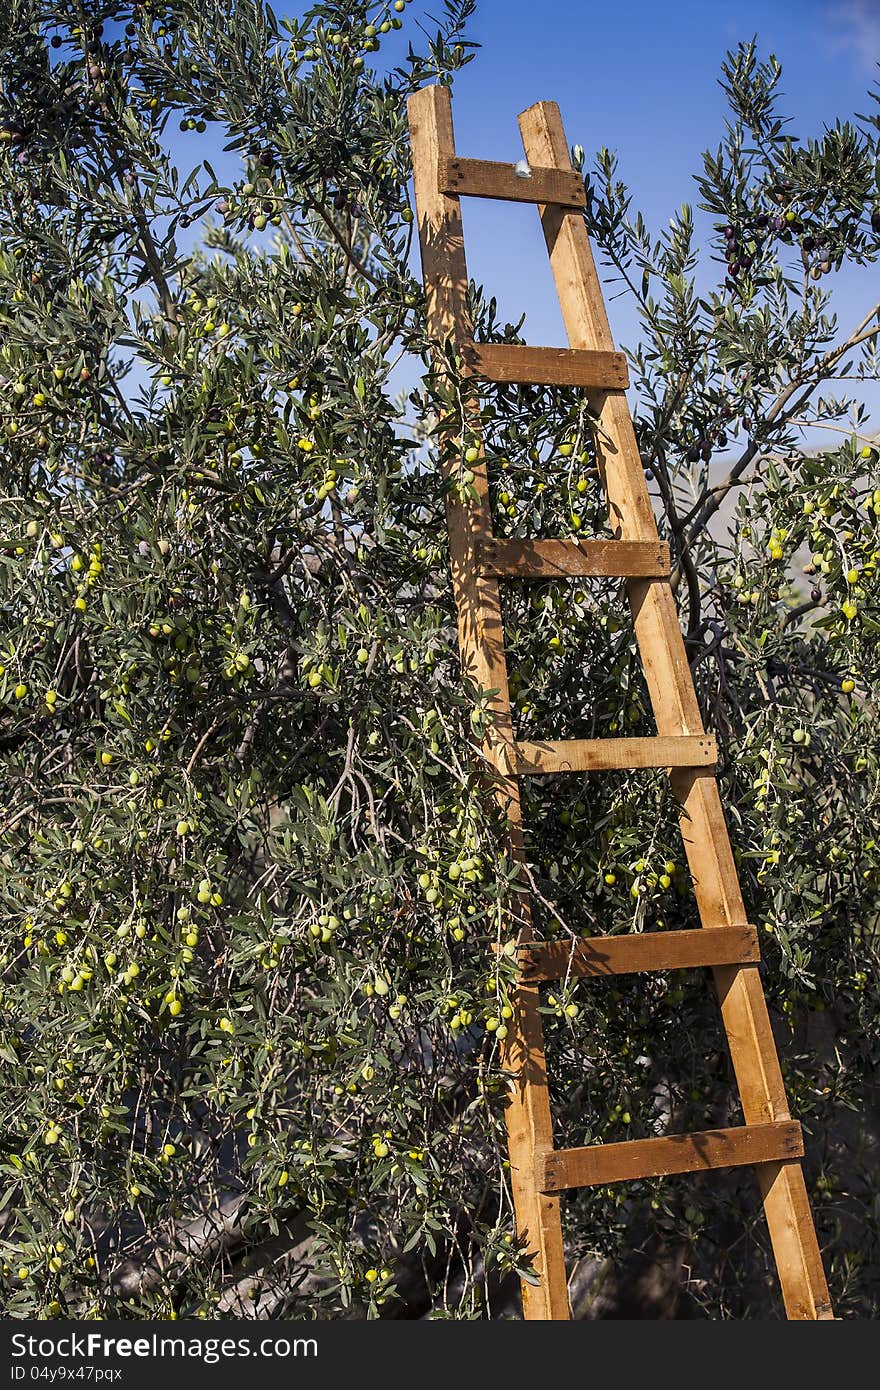 Olives harvesting in a field in Greece